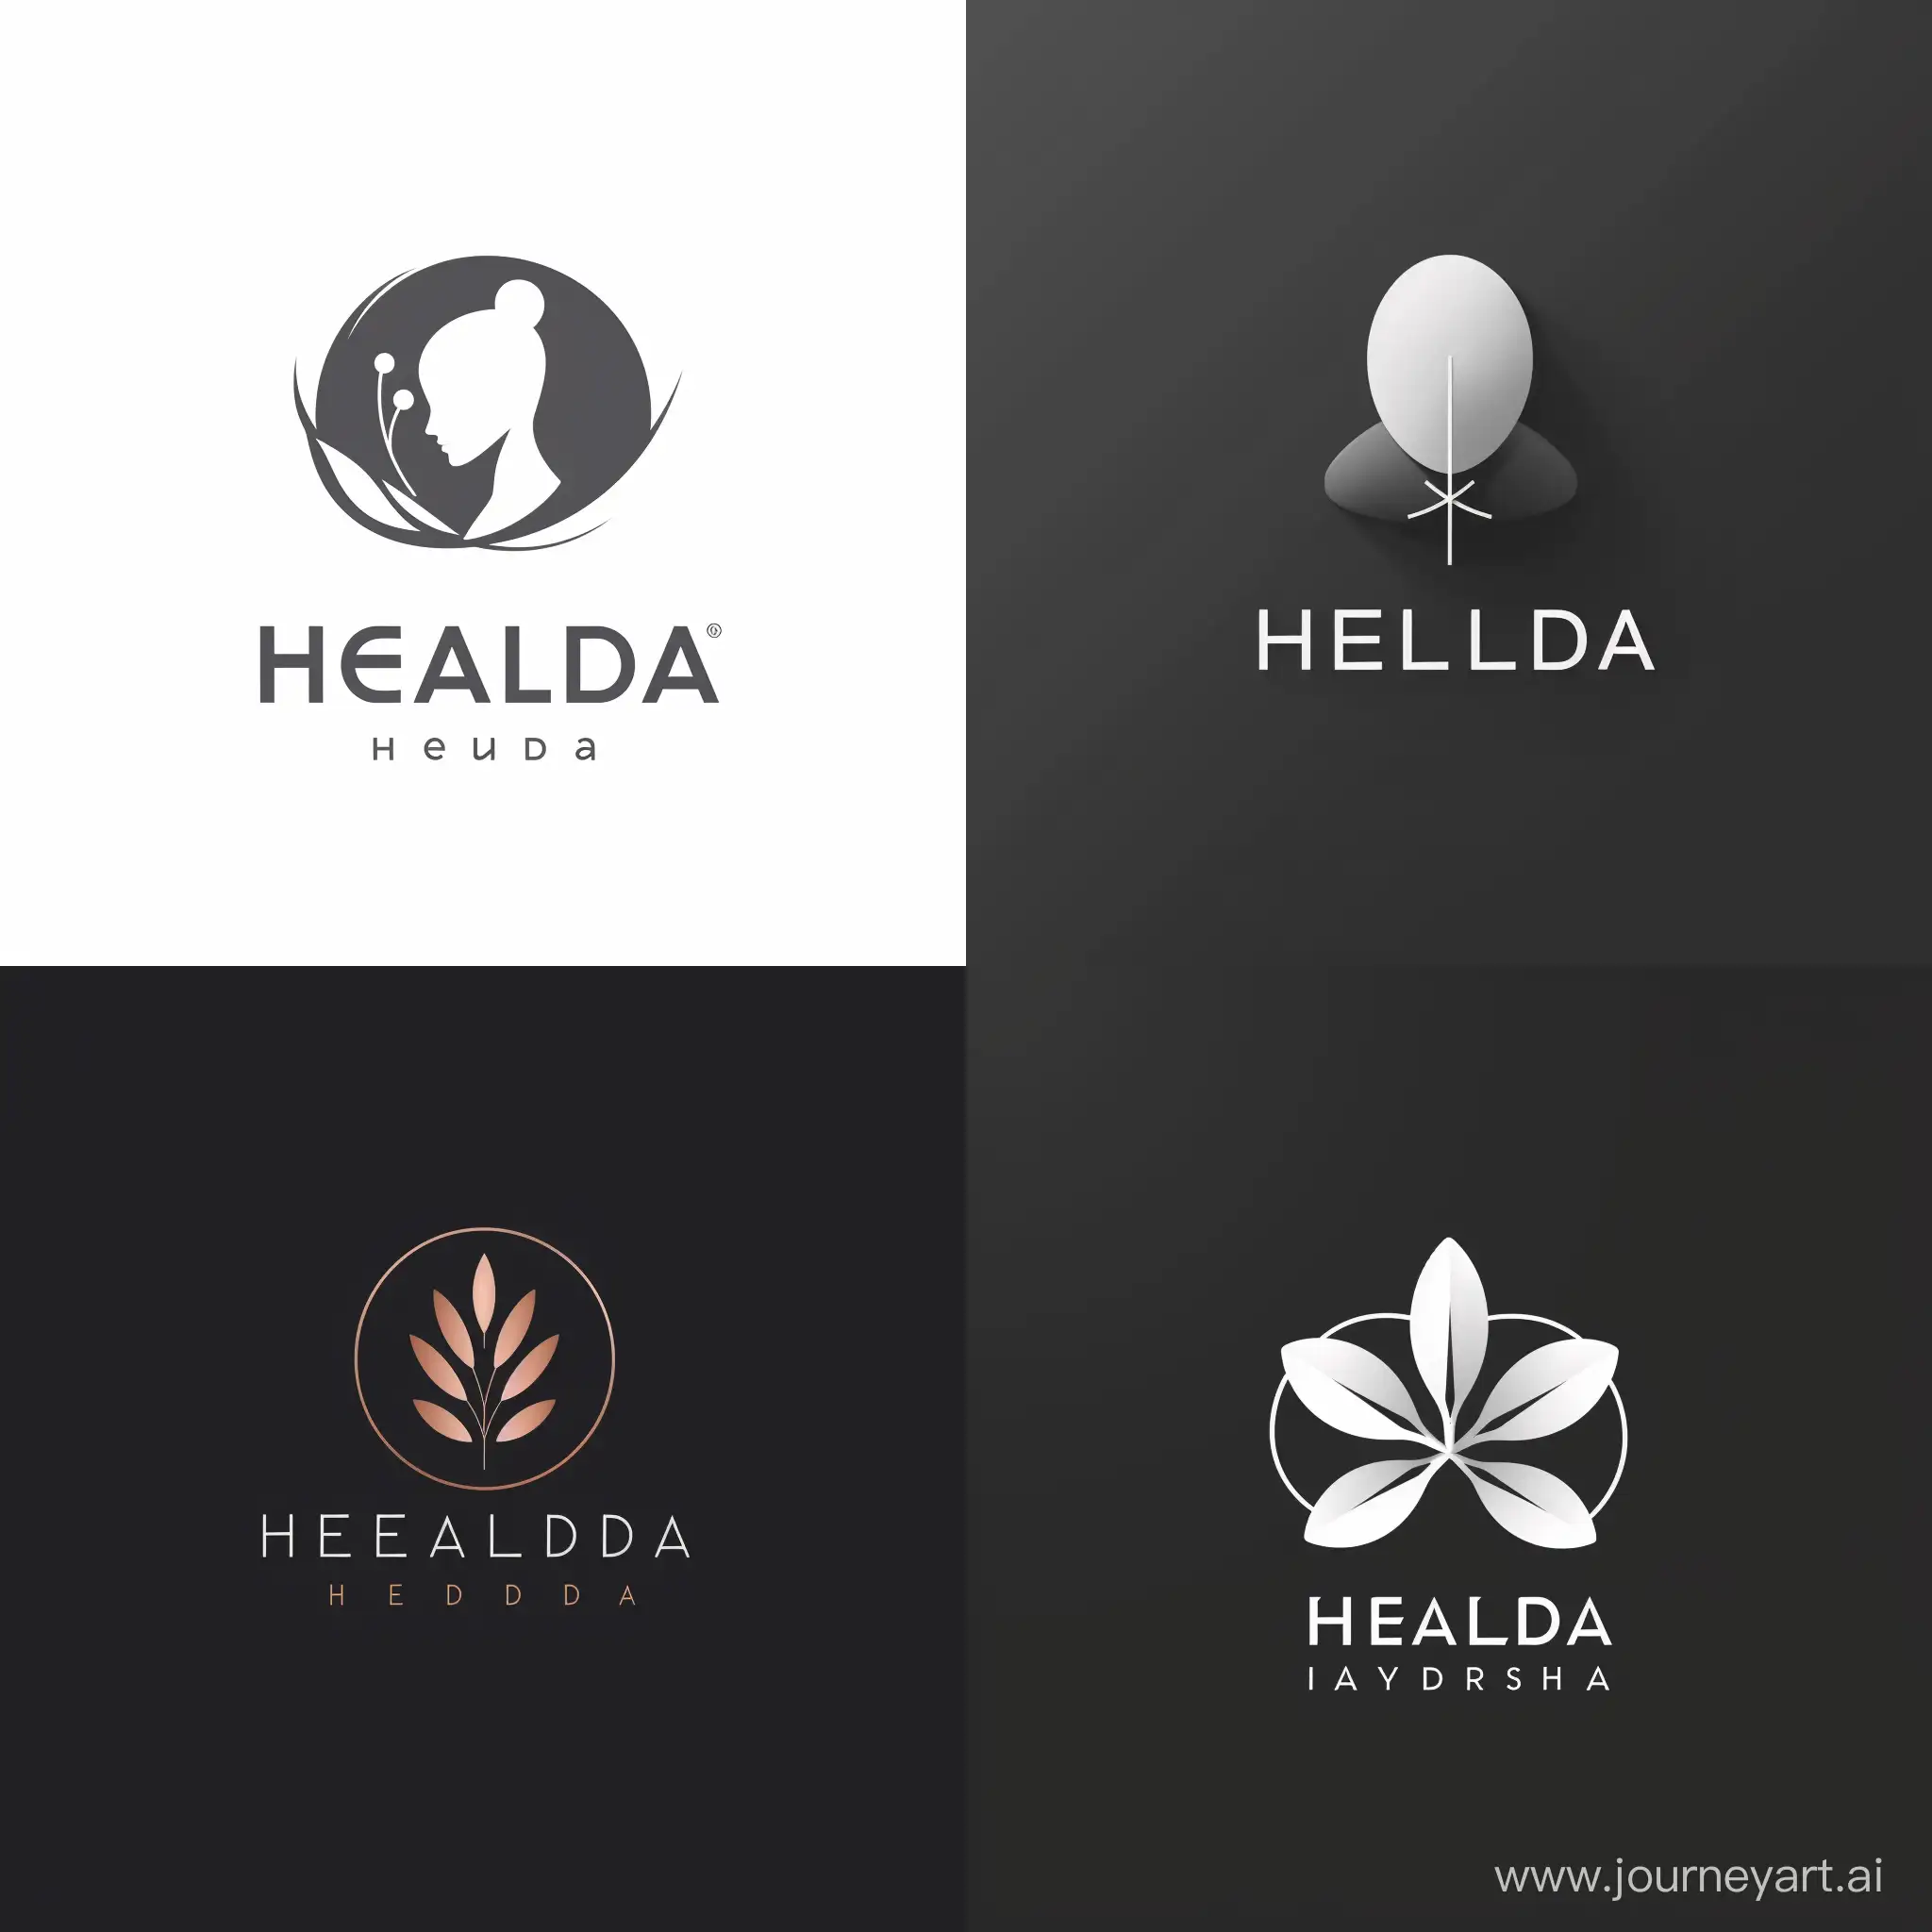 minimalist logo  for "Healda" company which is active in pharmaceutical and medical device production based on biocompatible and absorbable polymer